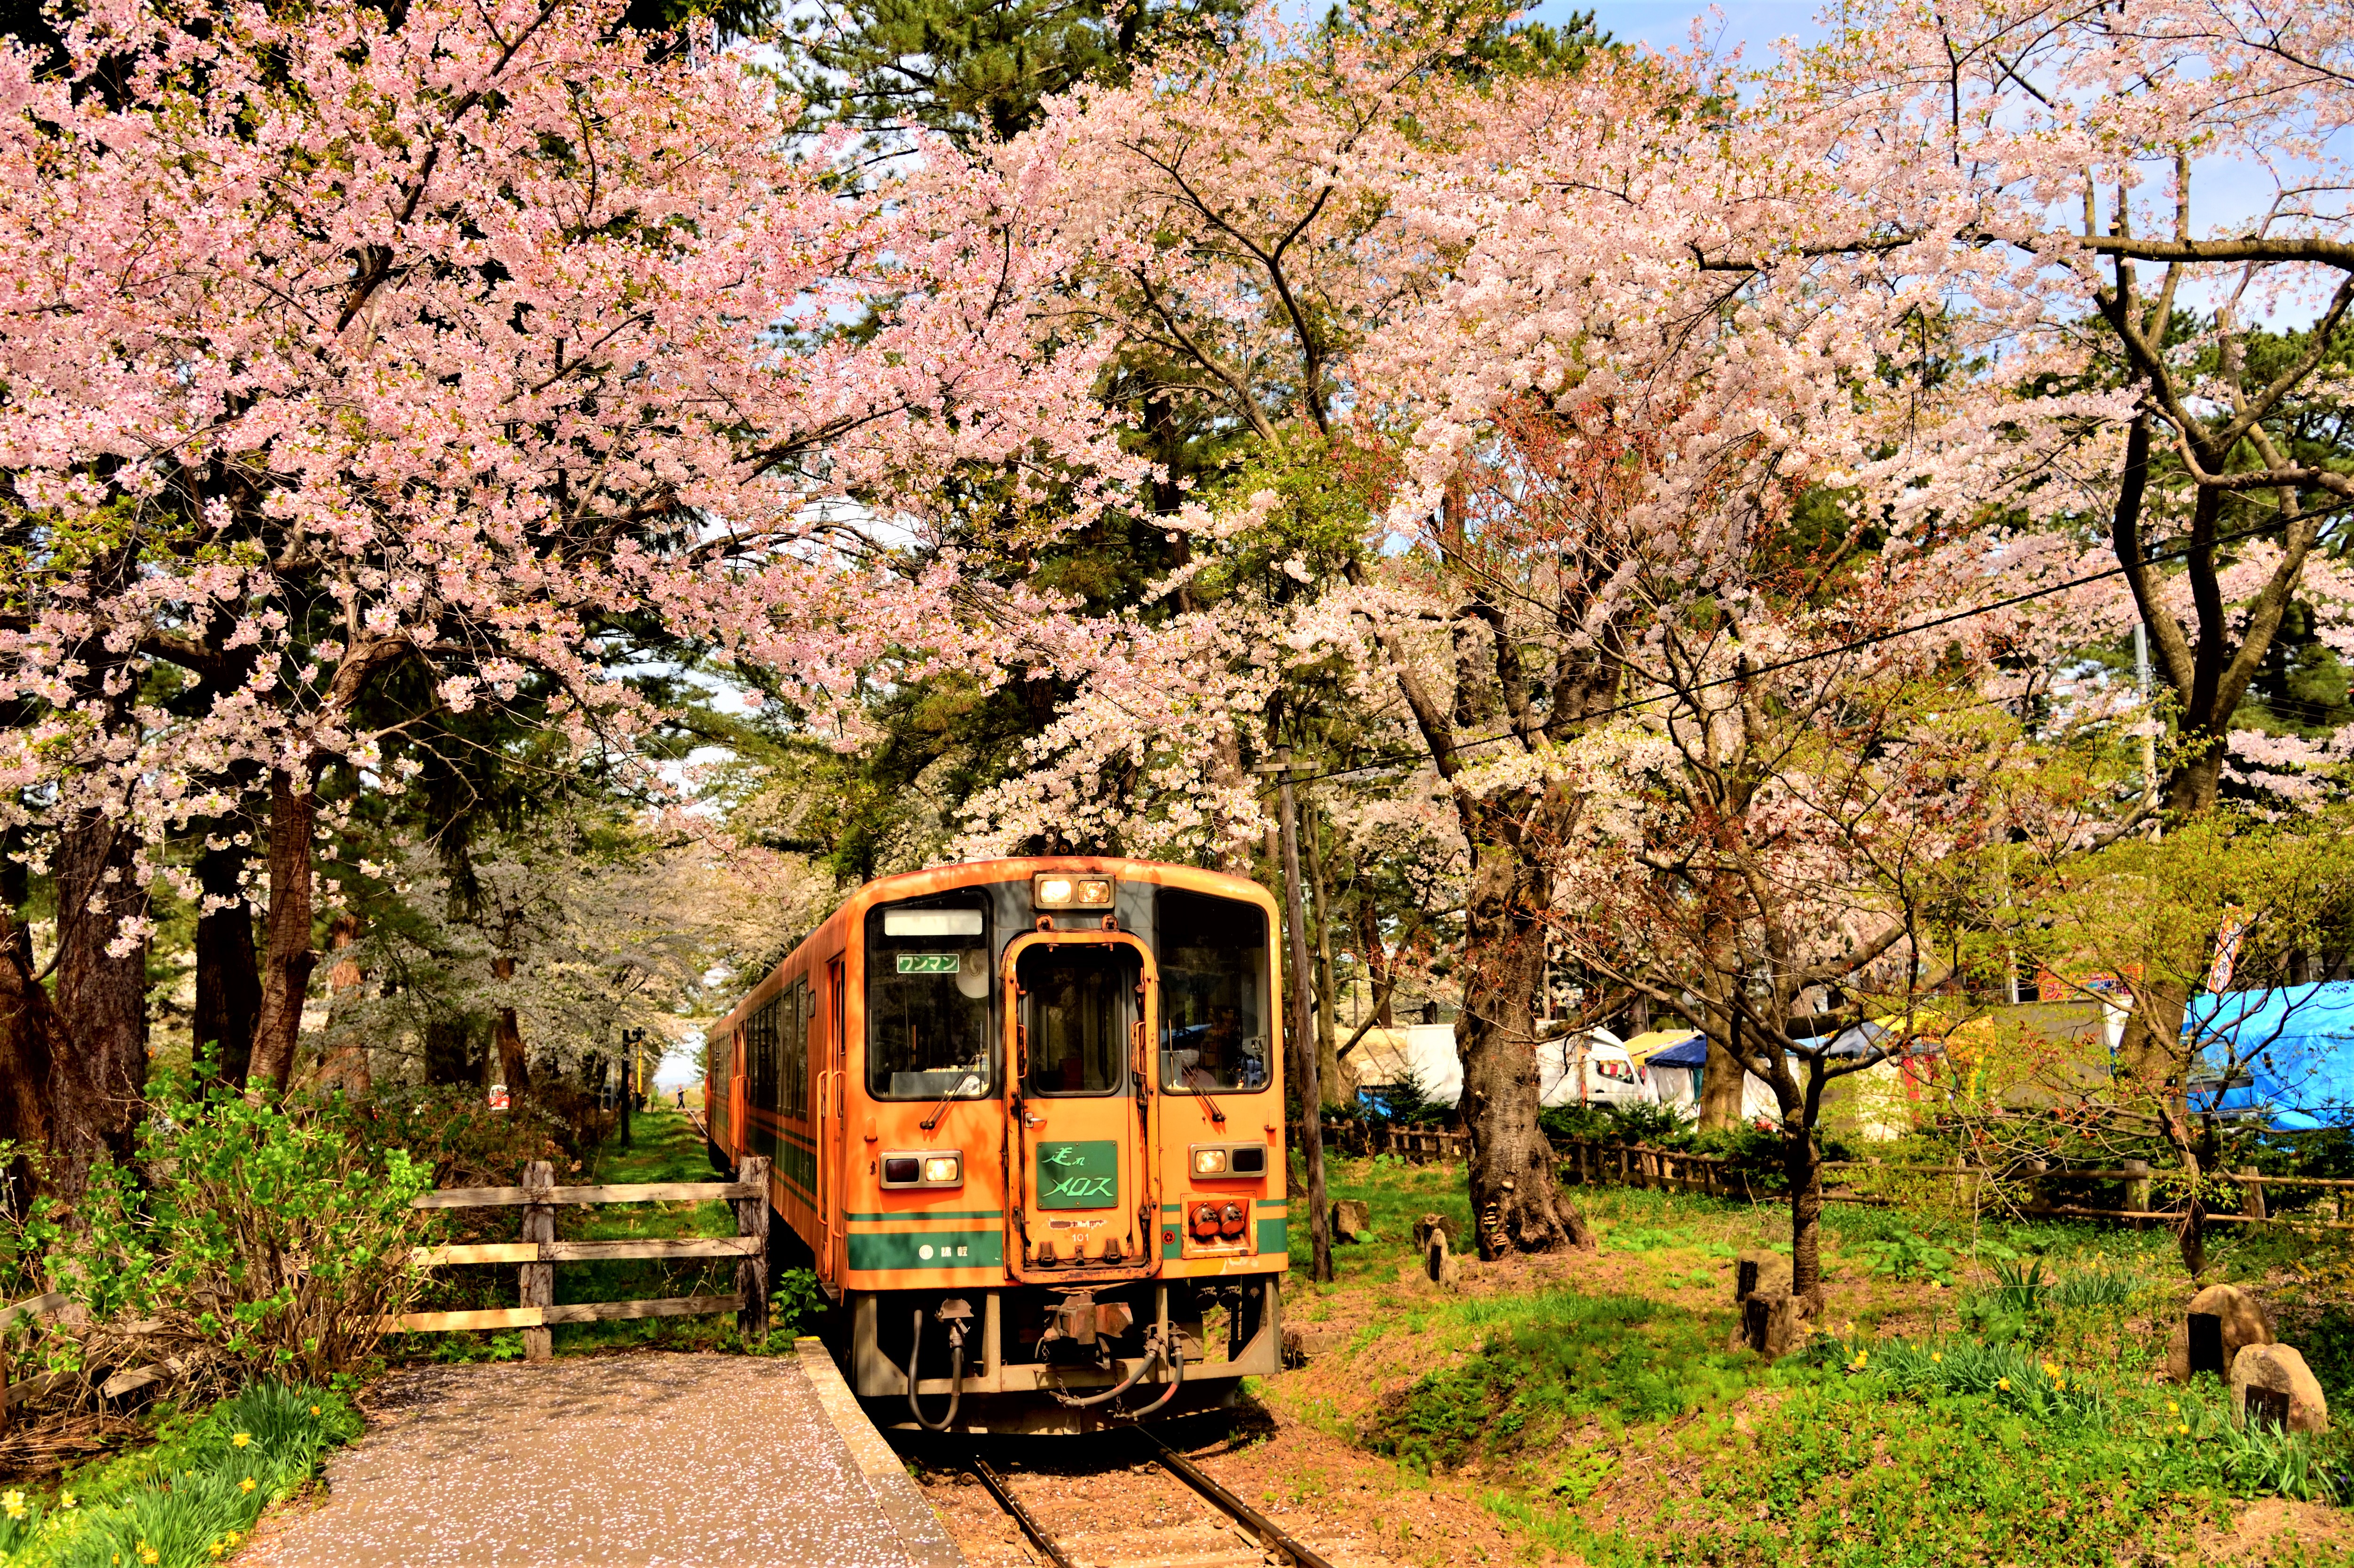 Cherry trees and train at Ashinopark station